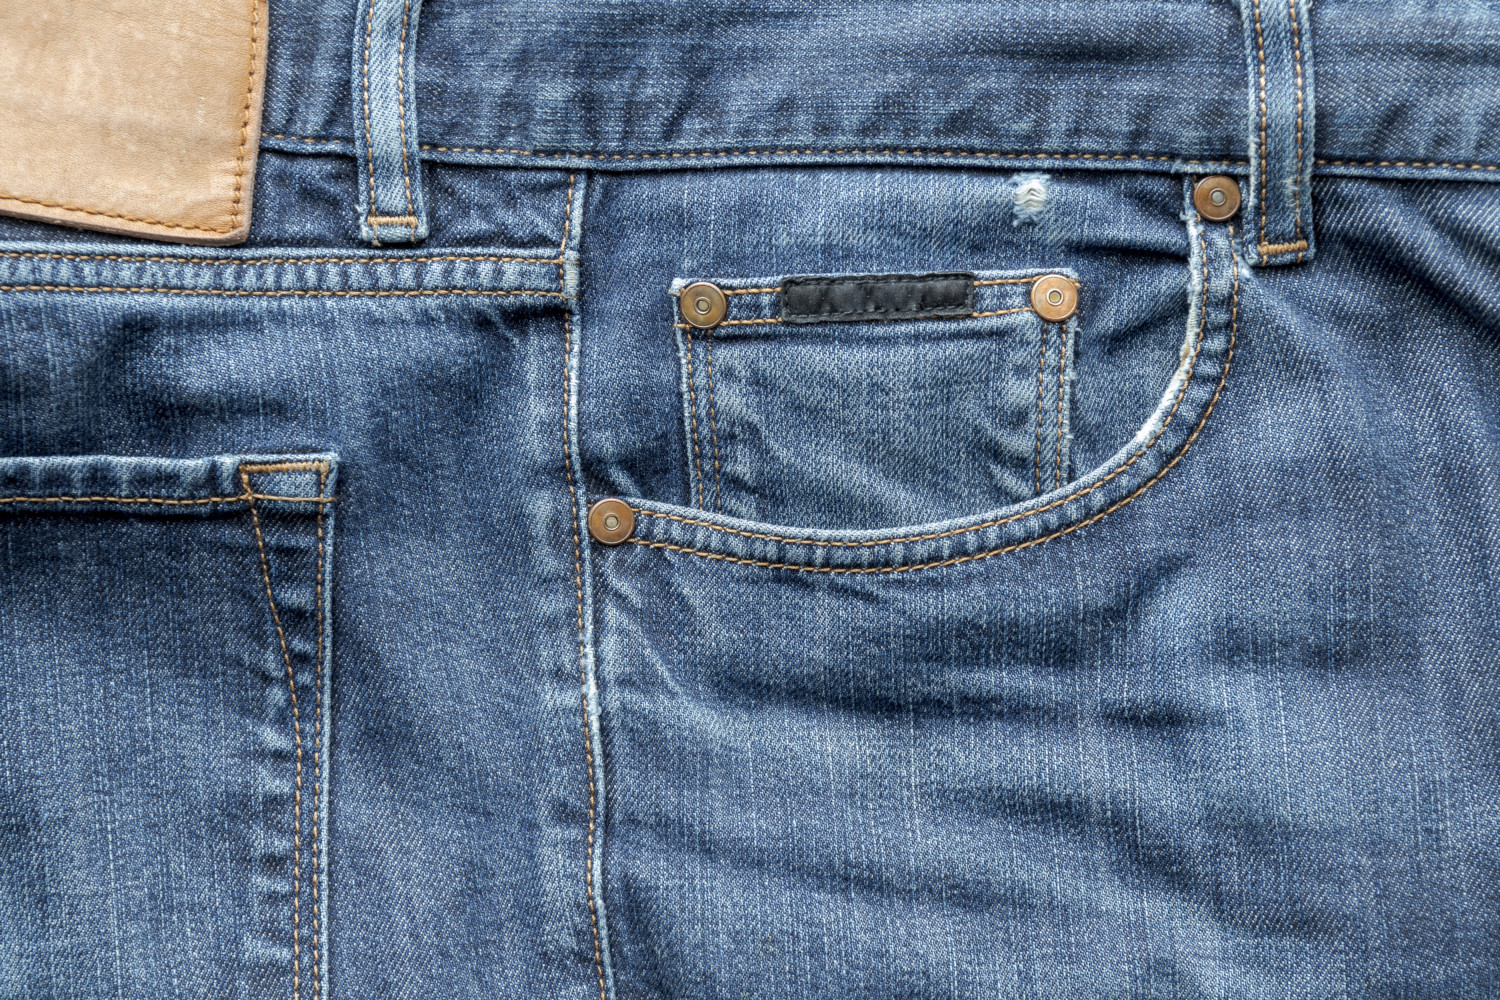 Small pocket on blue jeans